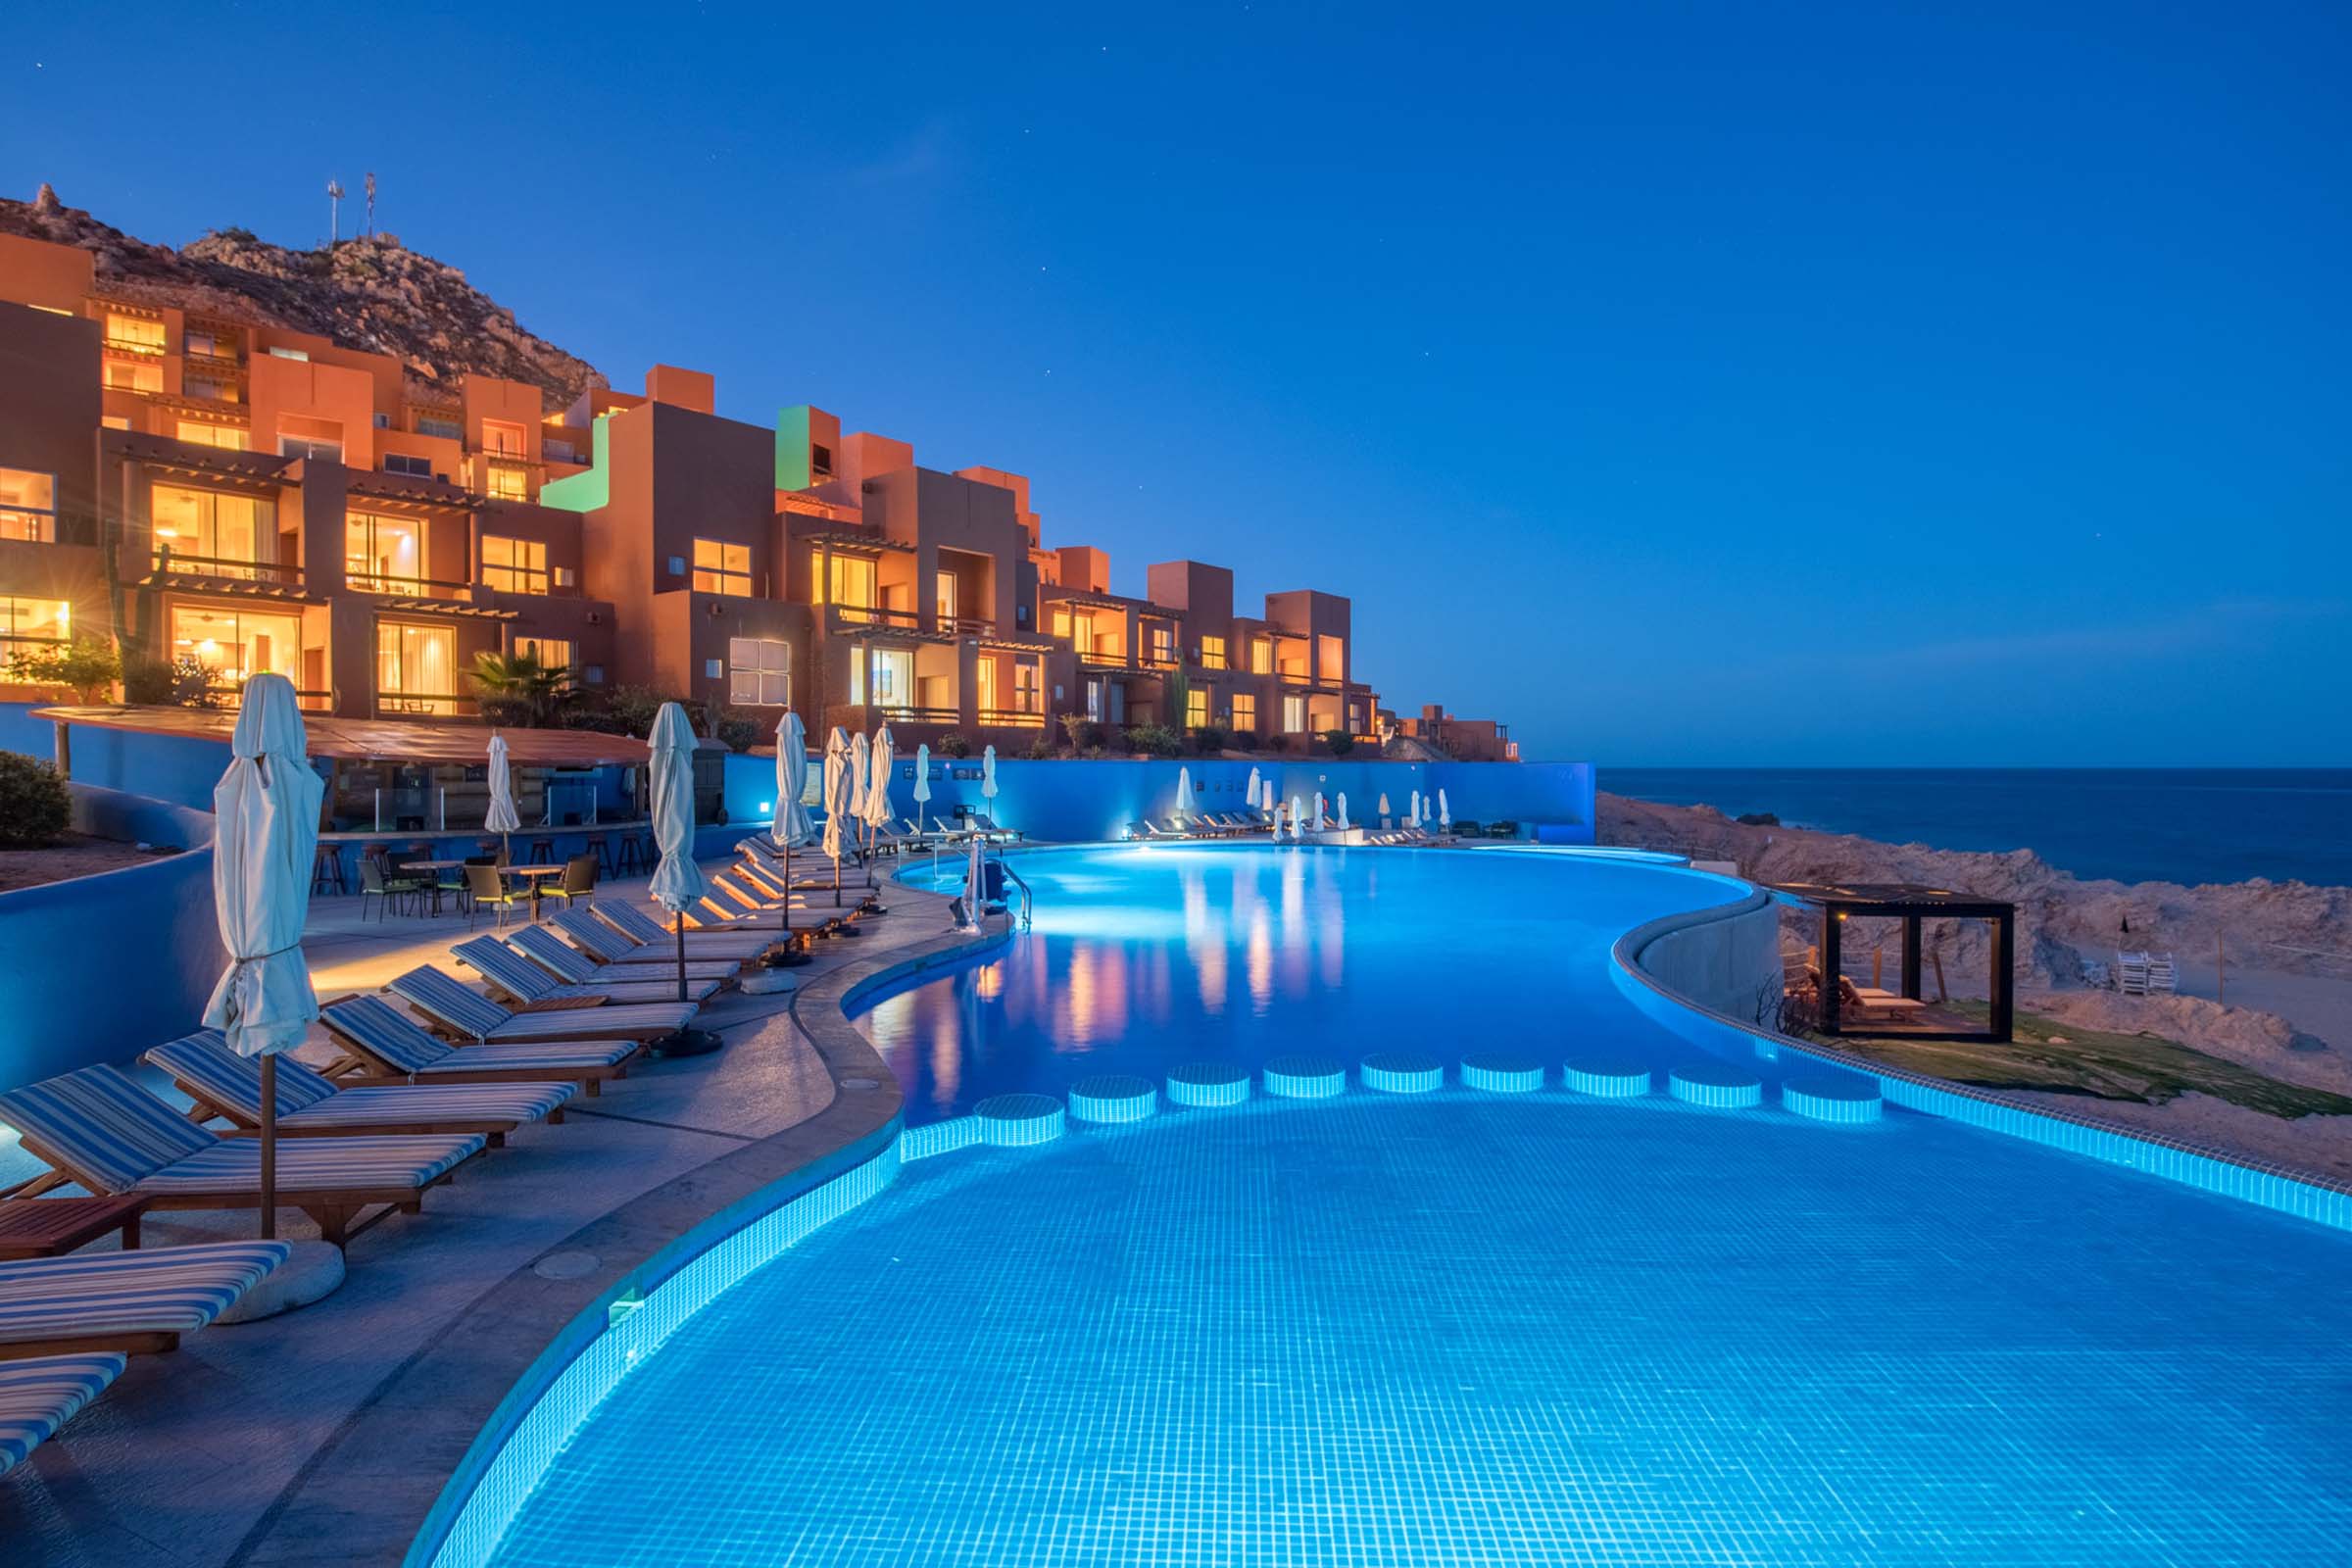 facade-of-the-hotel-club-regina-los-cabos-at-night-in-front-of-the-pool-and-the-sea